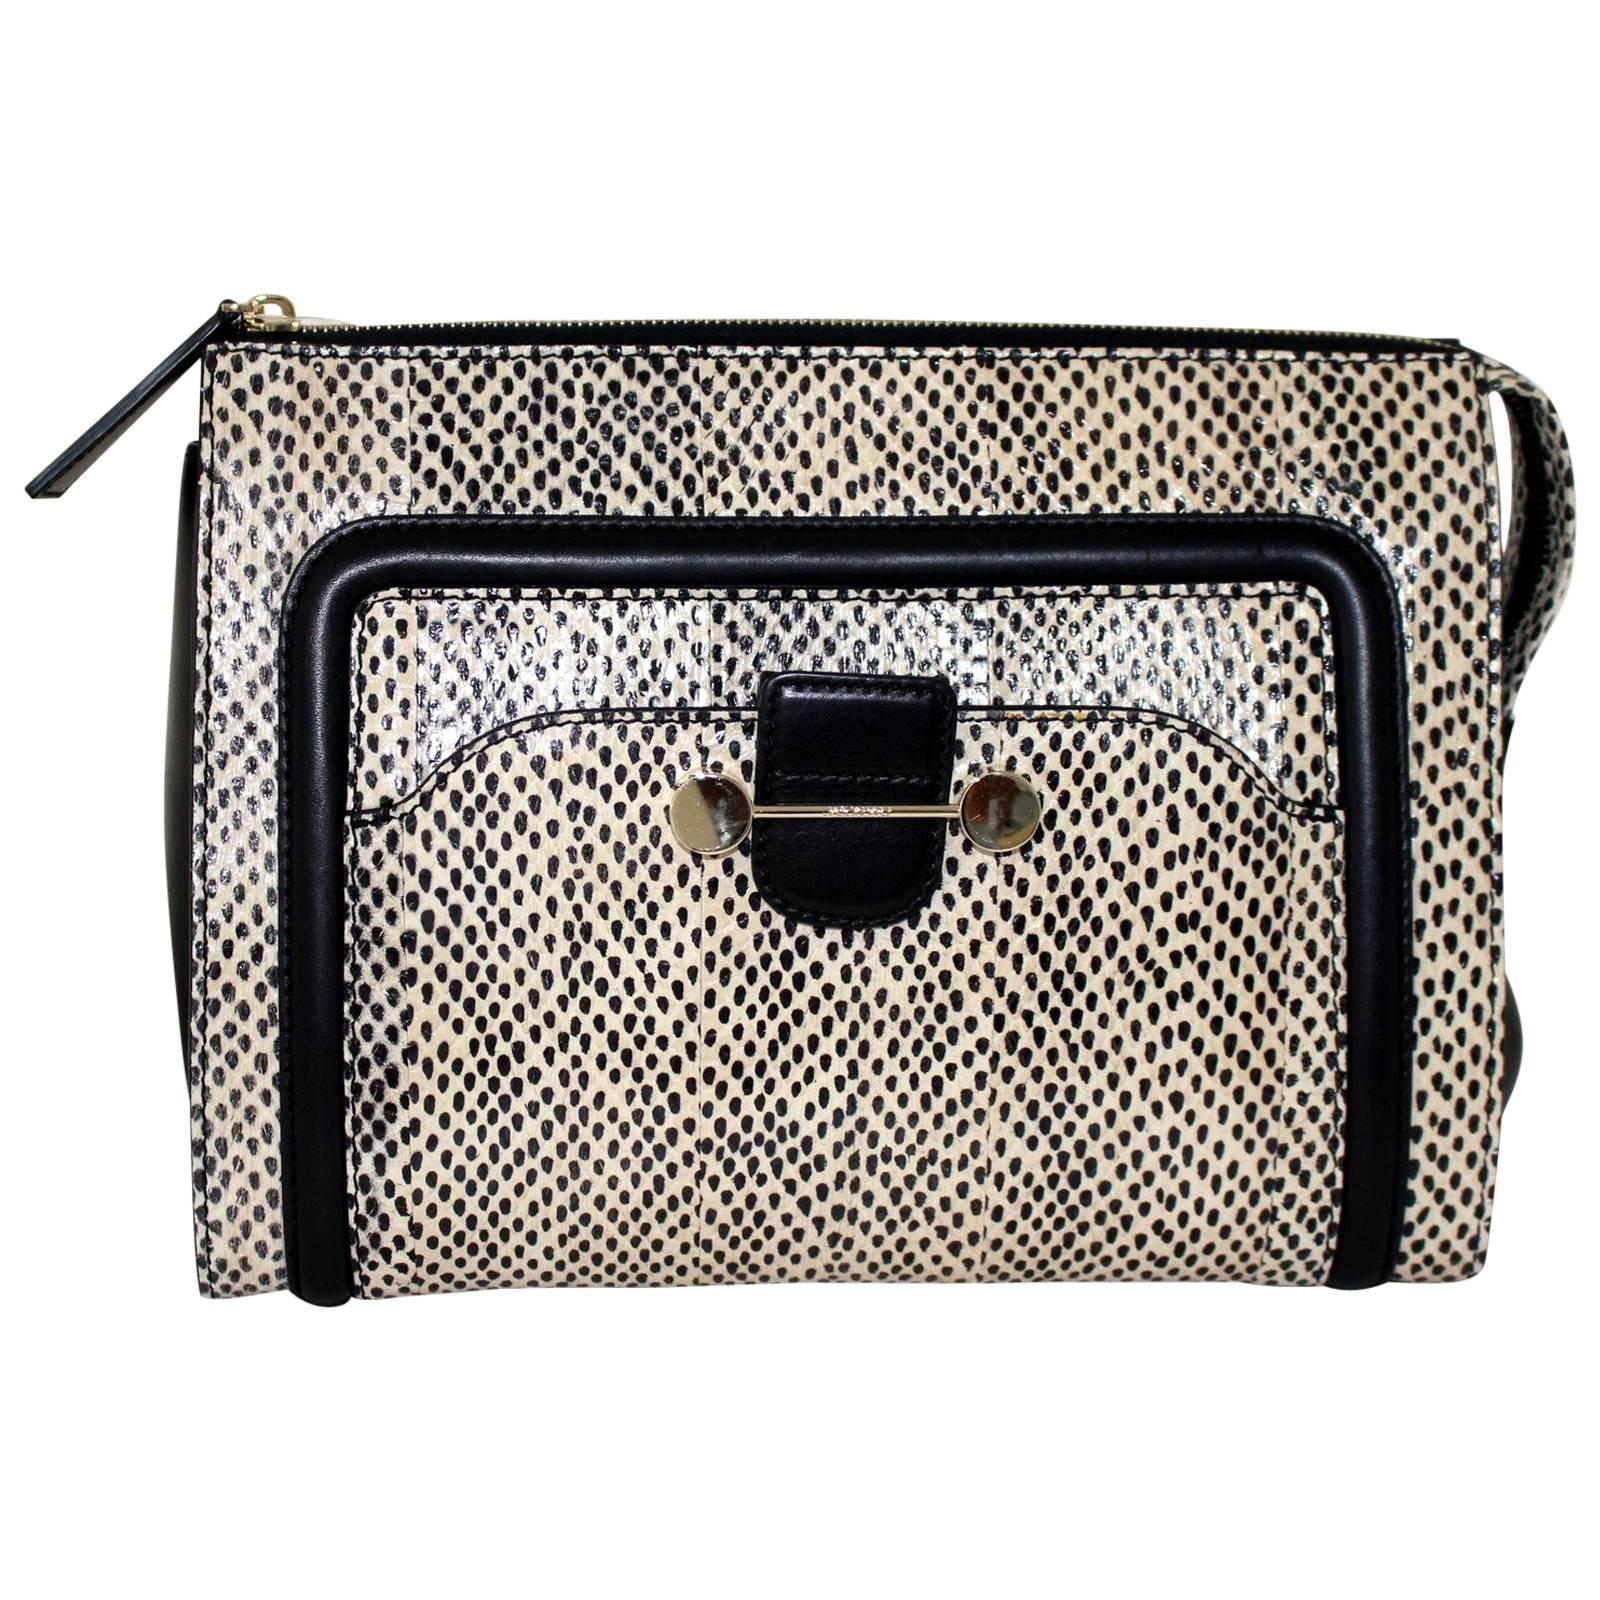 Jason Wu Daphne Water Snake Clutch with Black Leather For Sale